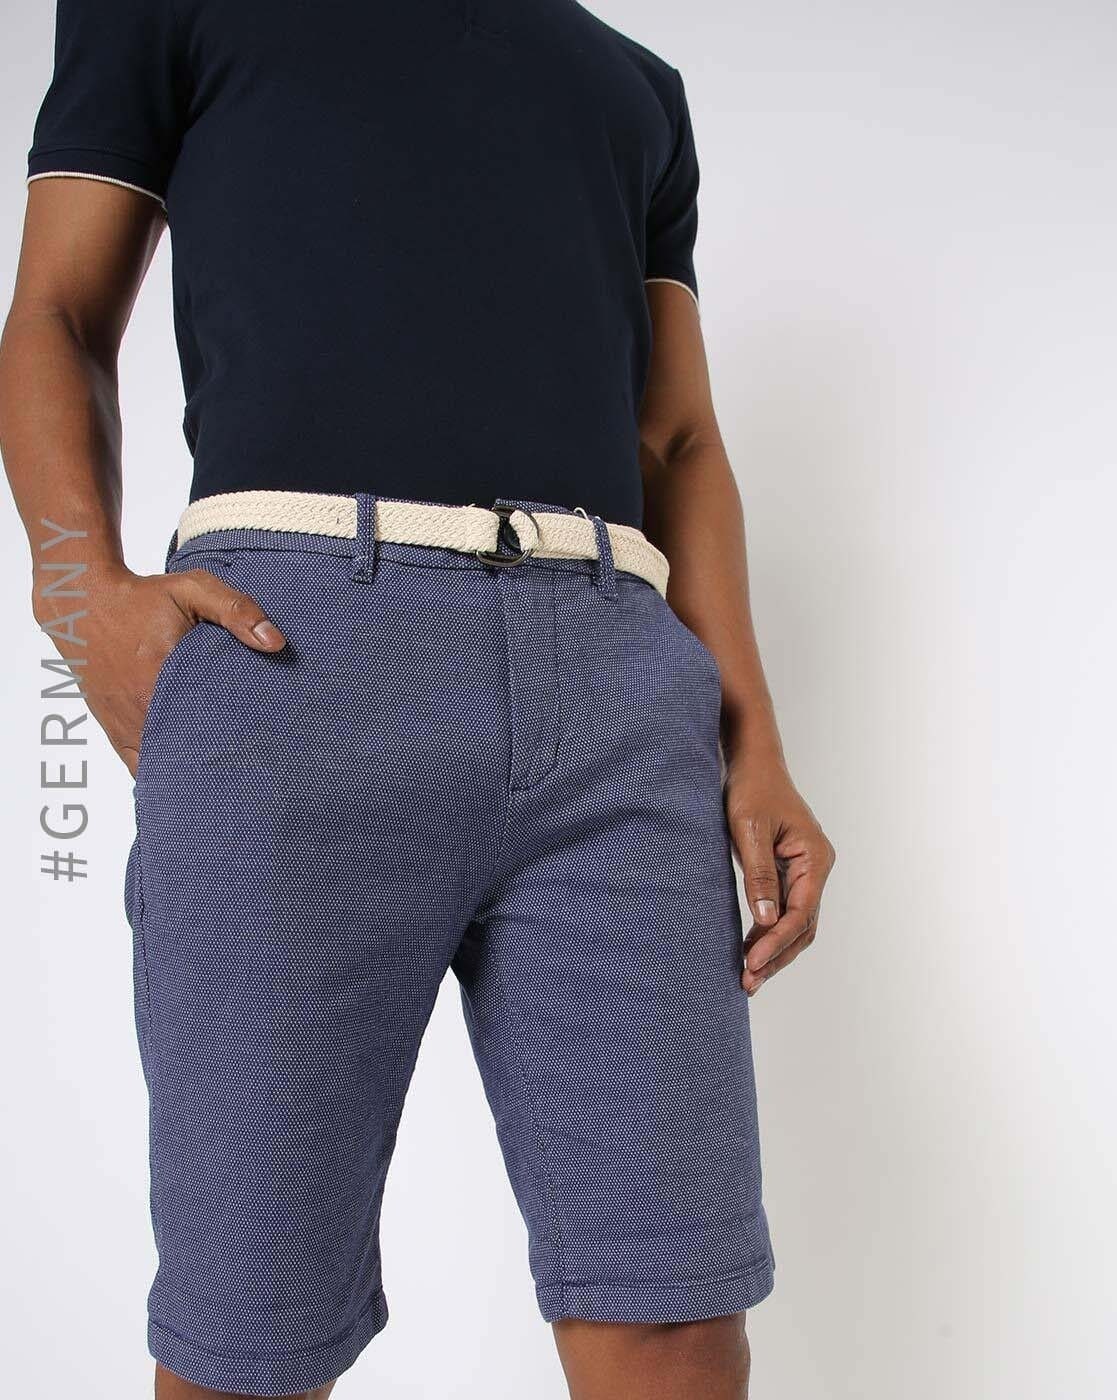 by Tailor Tom & Shorts Men Online 3/4ths Buy for Blue